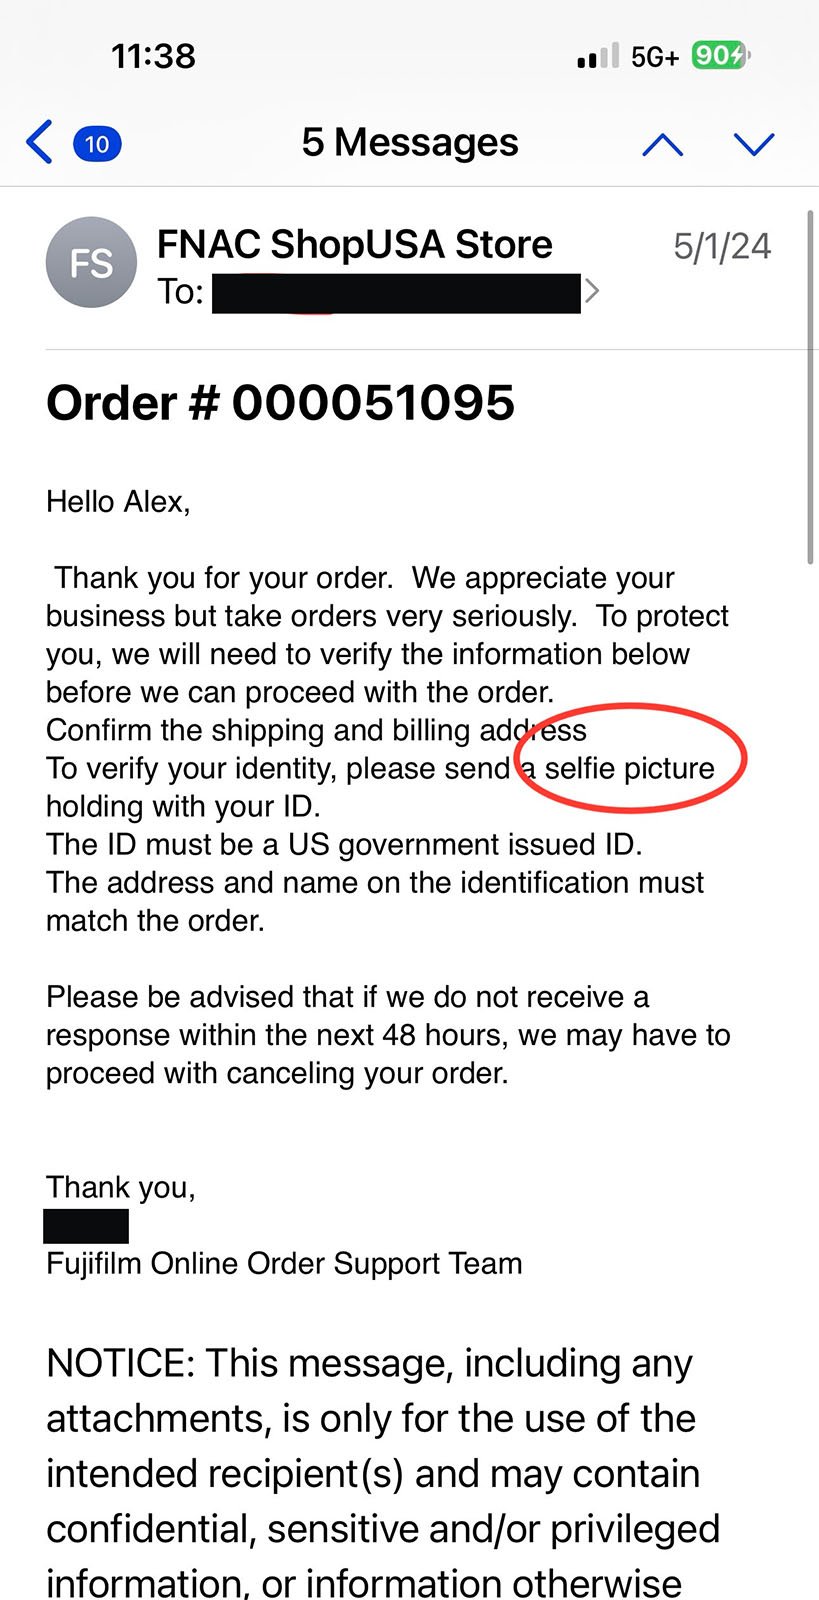 Screenshot of an email from Fujifilm Online Order Support Team with Order #000051095. The email requests a selfie picture holding an ID to confirm identity before proceeding with the order. The email was sent to someone named Alex, dated 5/1/24.